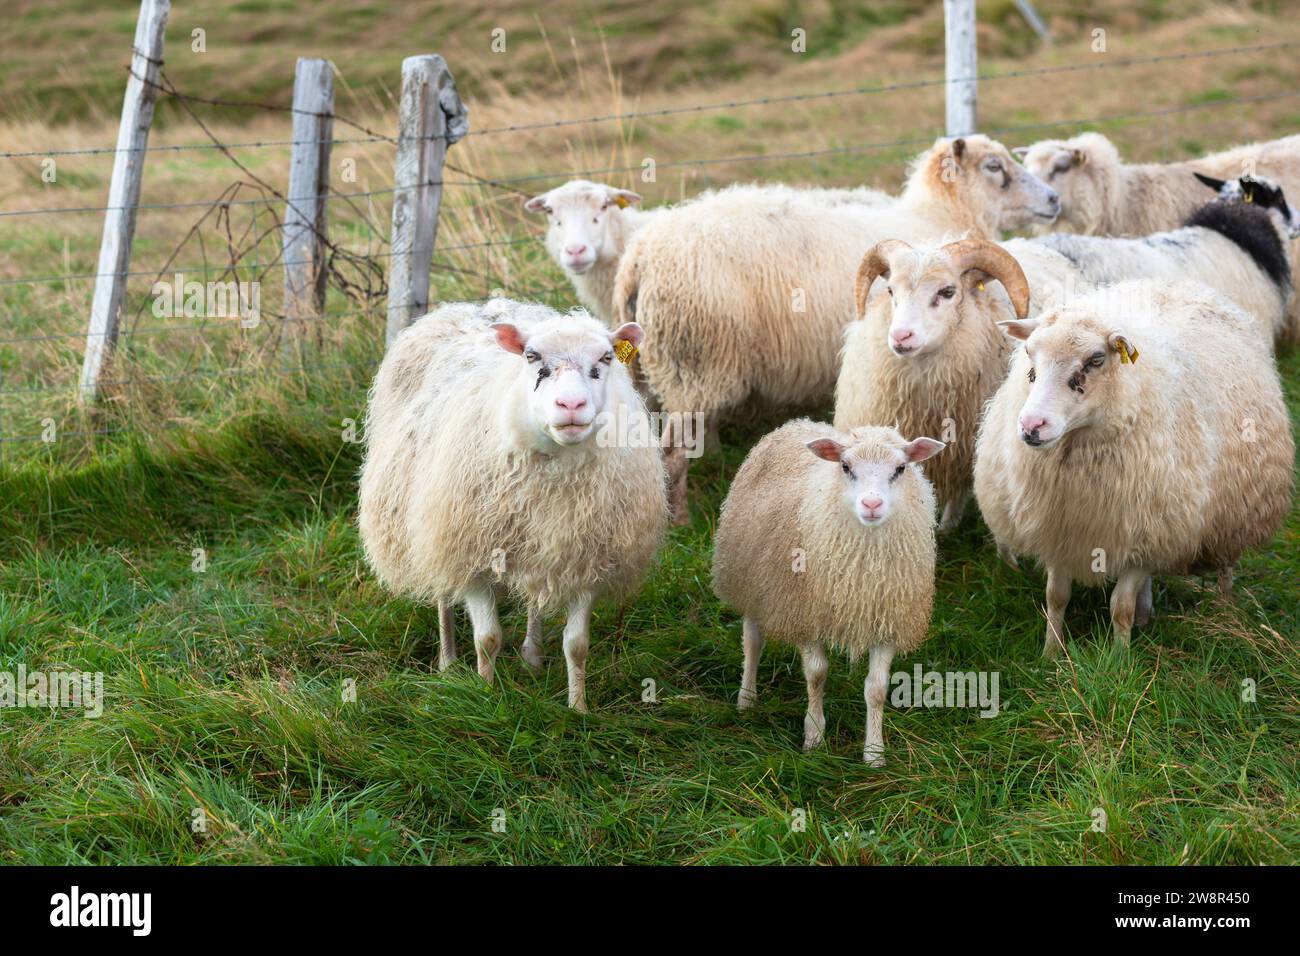 Small flock of Icelandic sheep in pen, Hunaver, Iceland Stock Photo